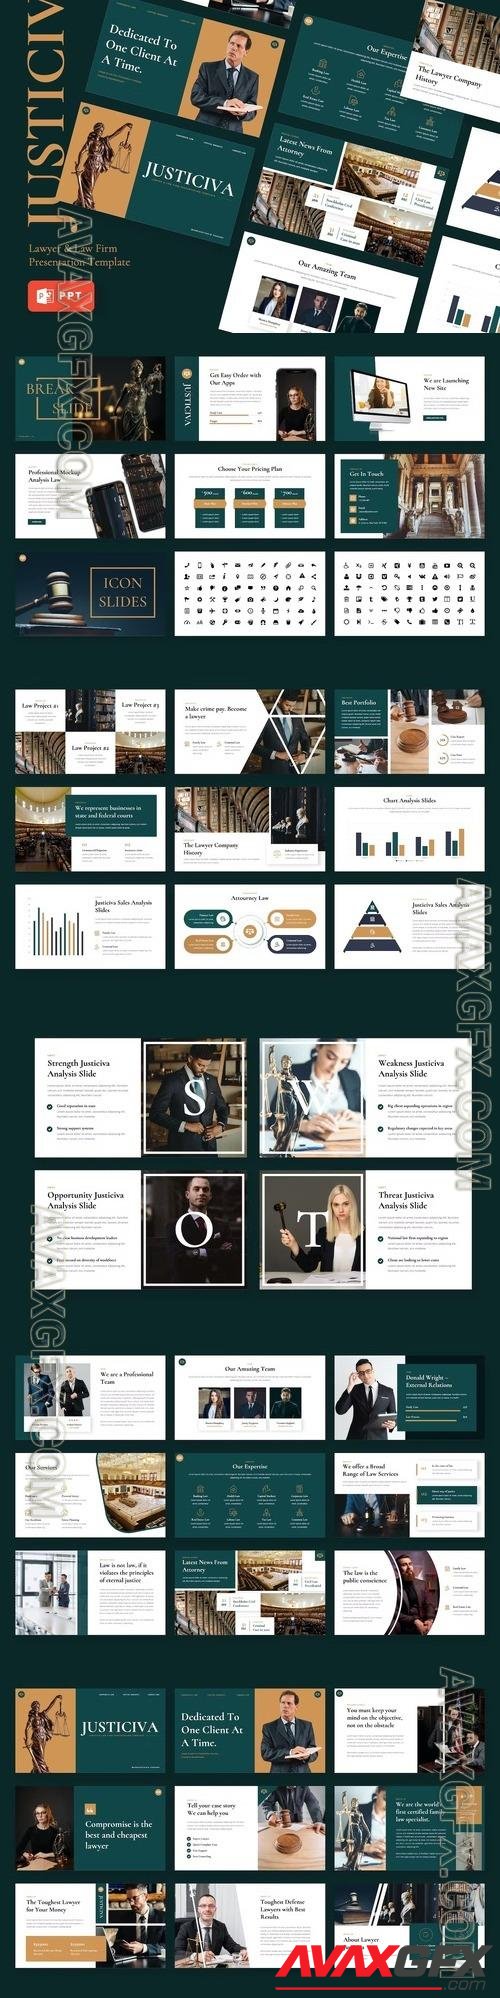 Justiciva - Lawyer & Law Firm Powerpoint, Keynote Template 